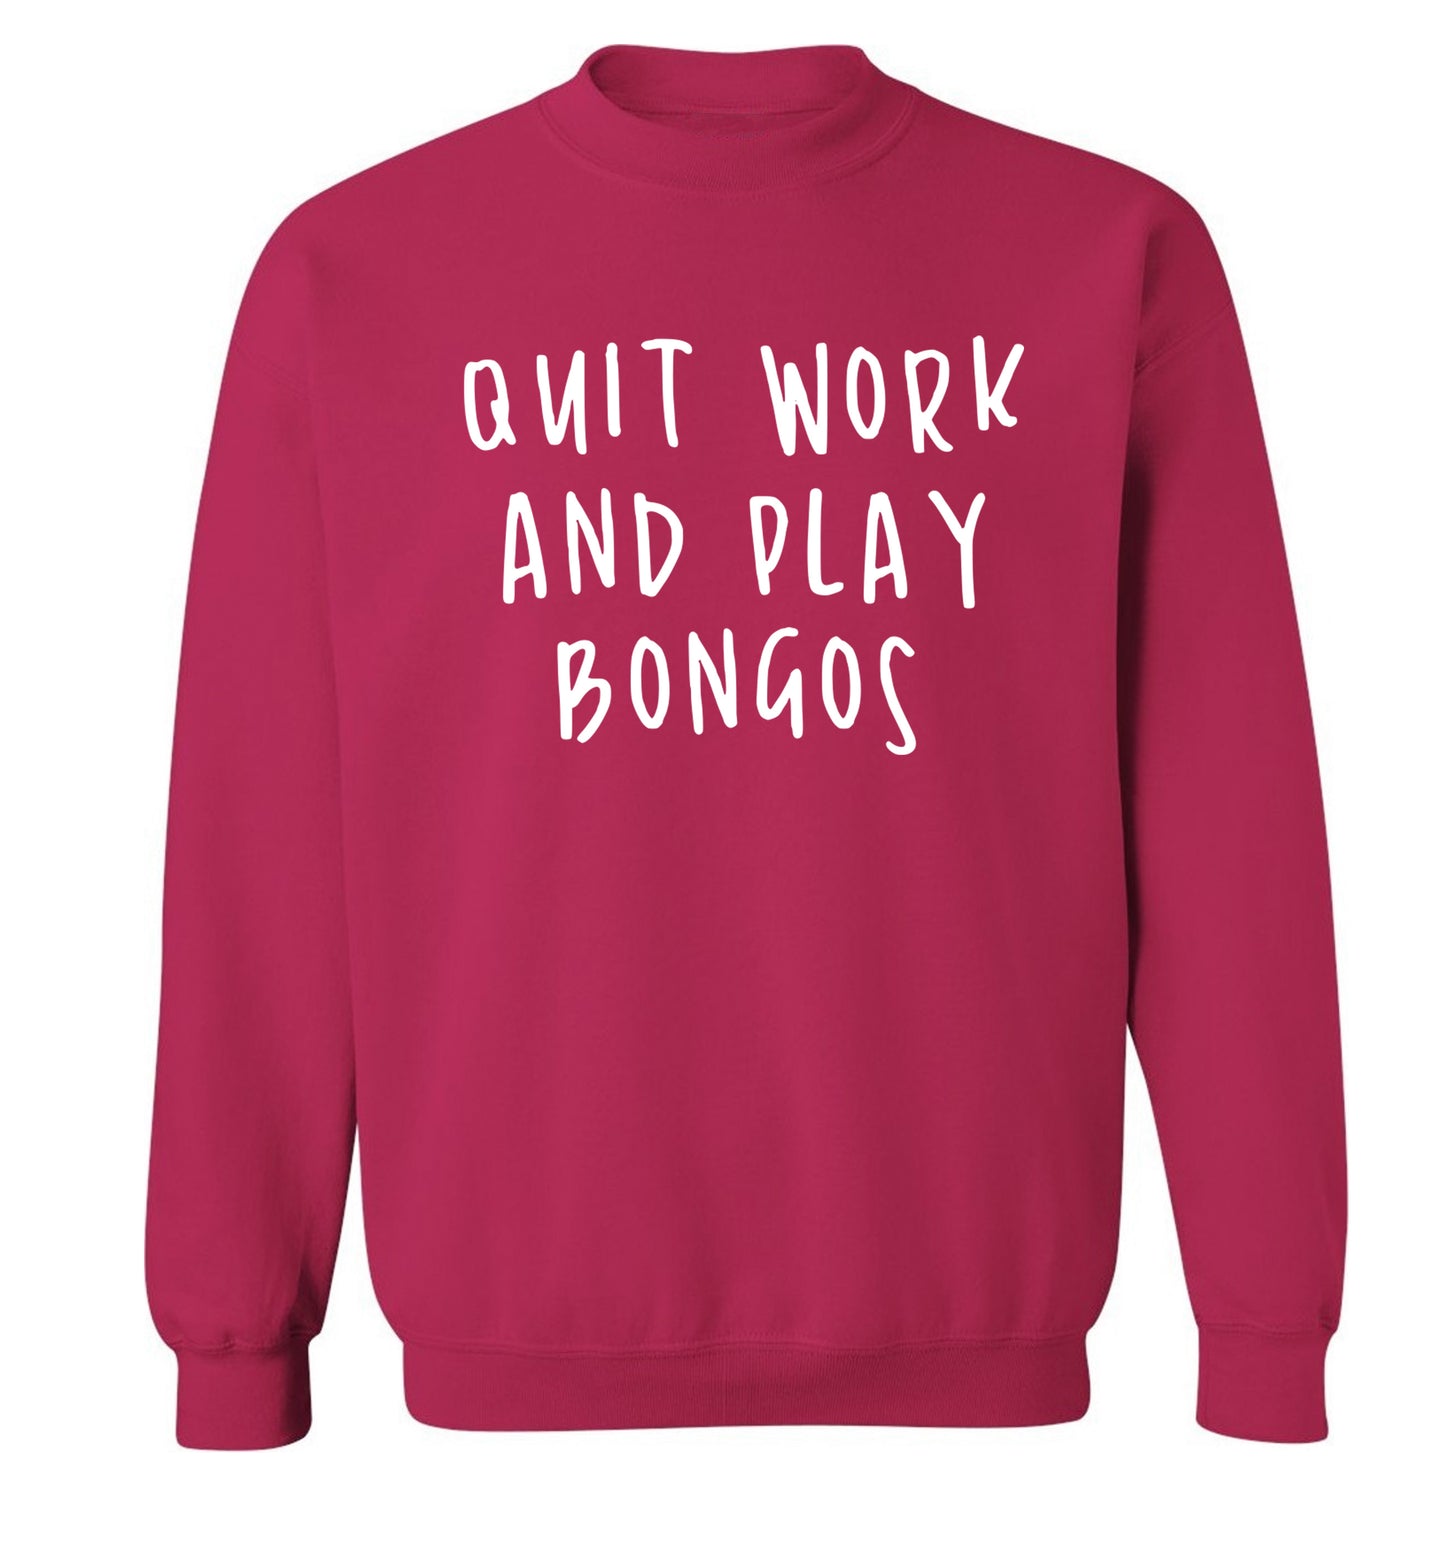 Quit work and play bongos Adult's unisex pink Sweater 2XL